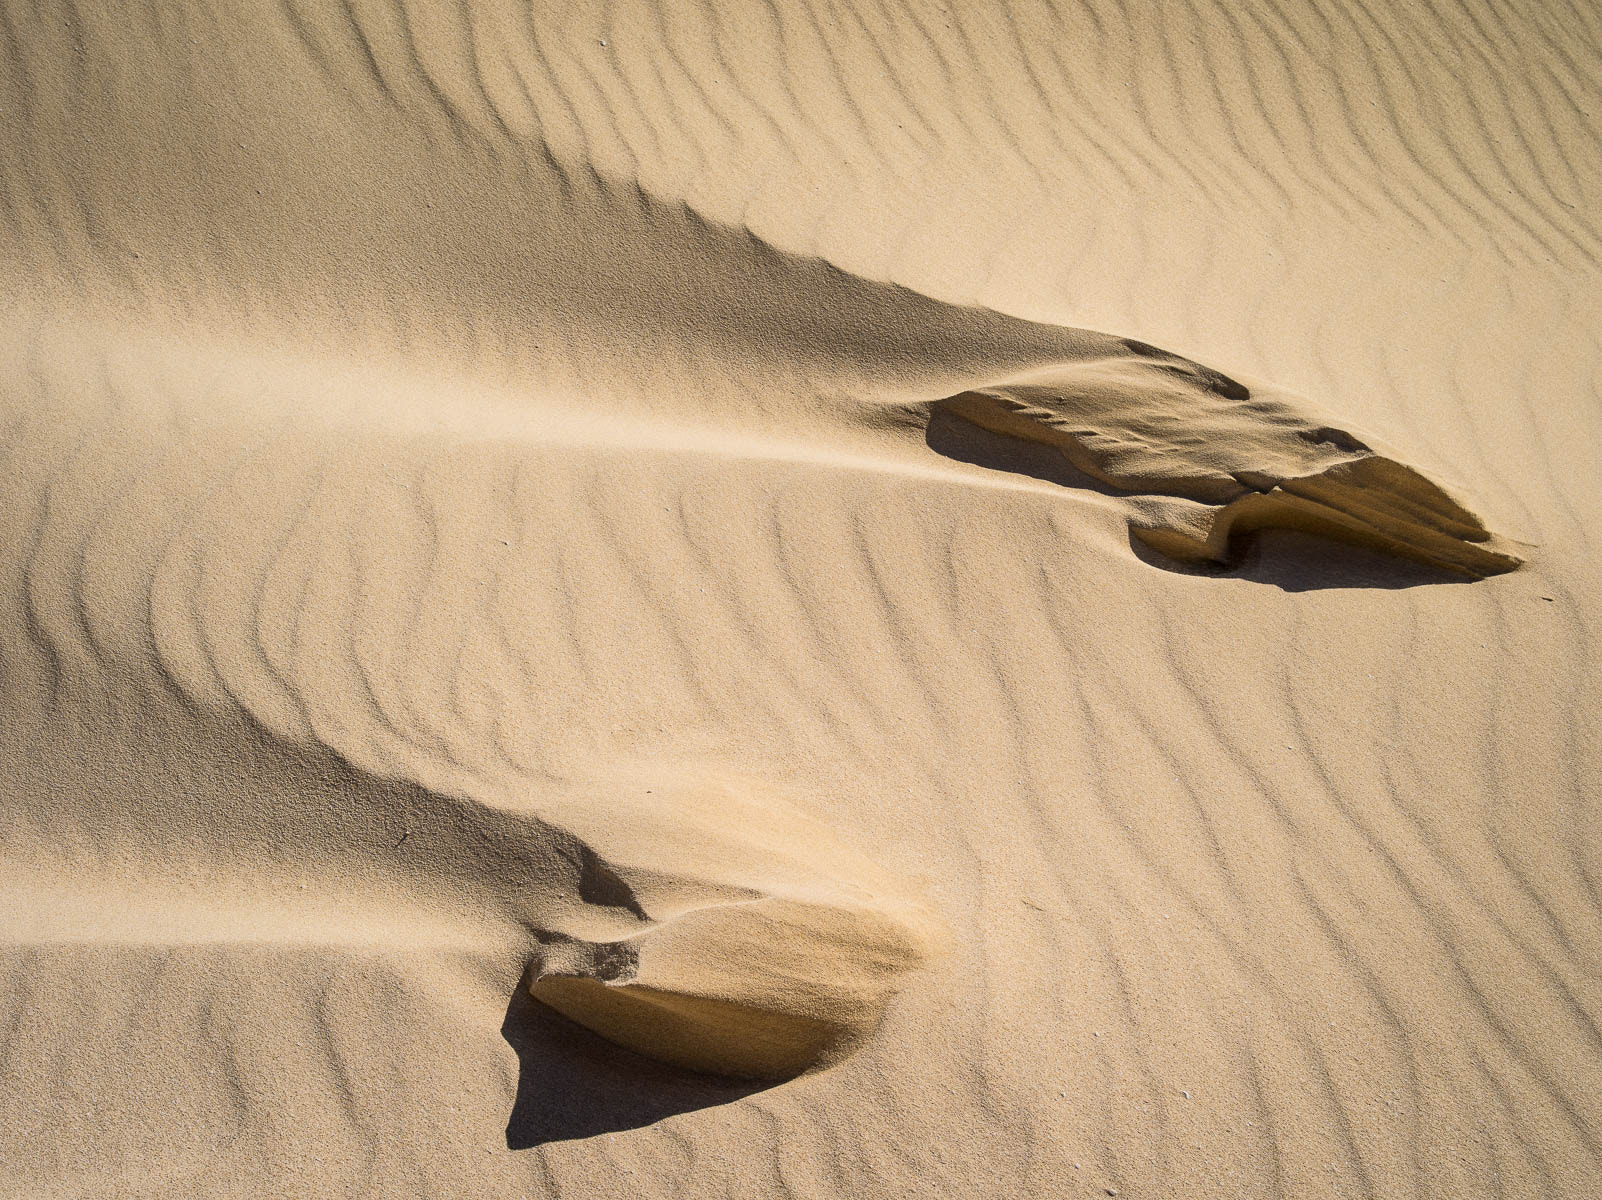 Pentax 645D sample photo. In the dunes photography